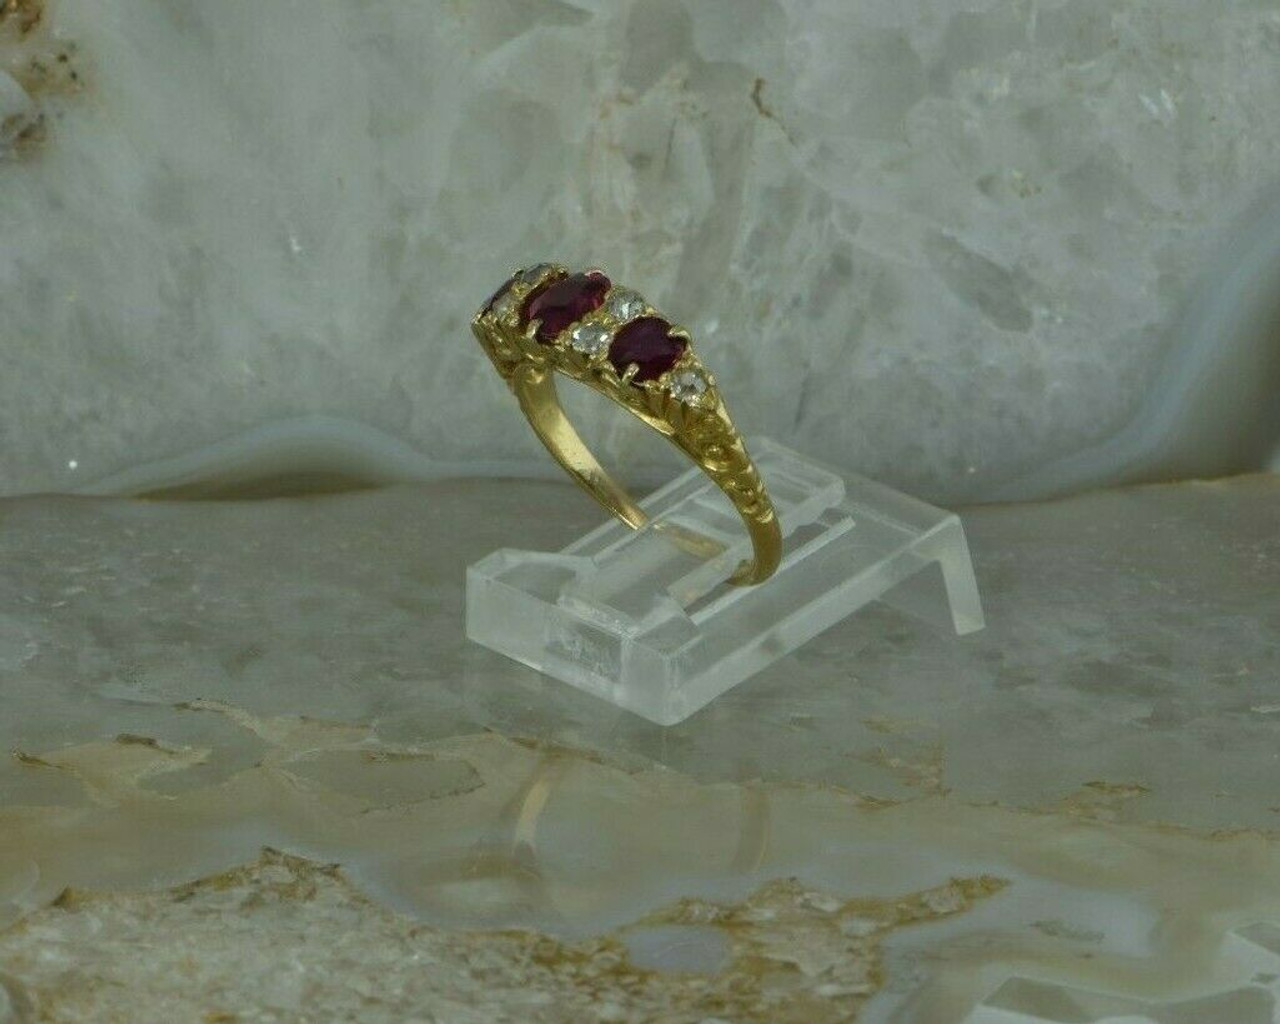 Oval Halo Prong Set Gold Ruby Ring with Diamonds